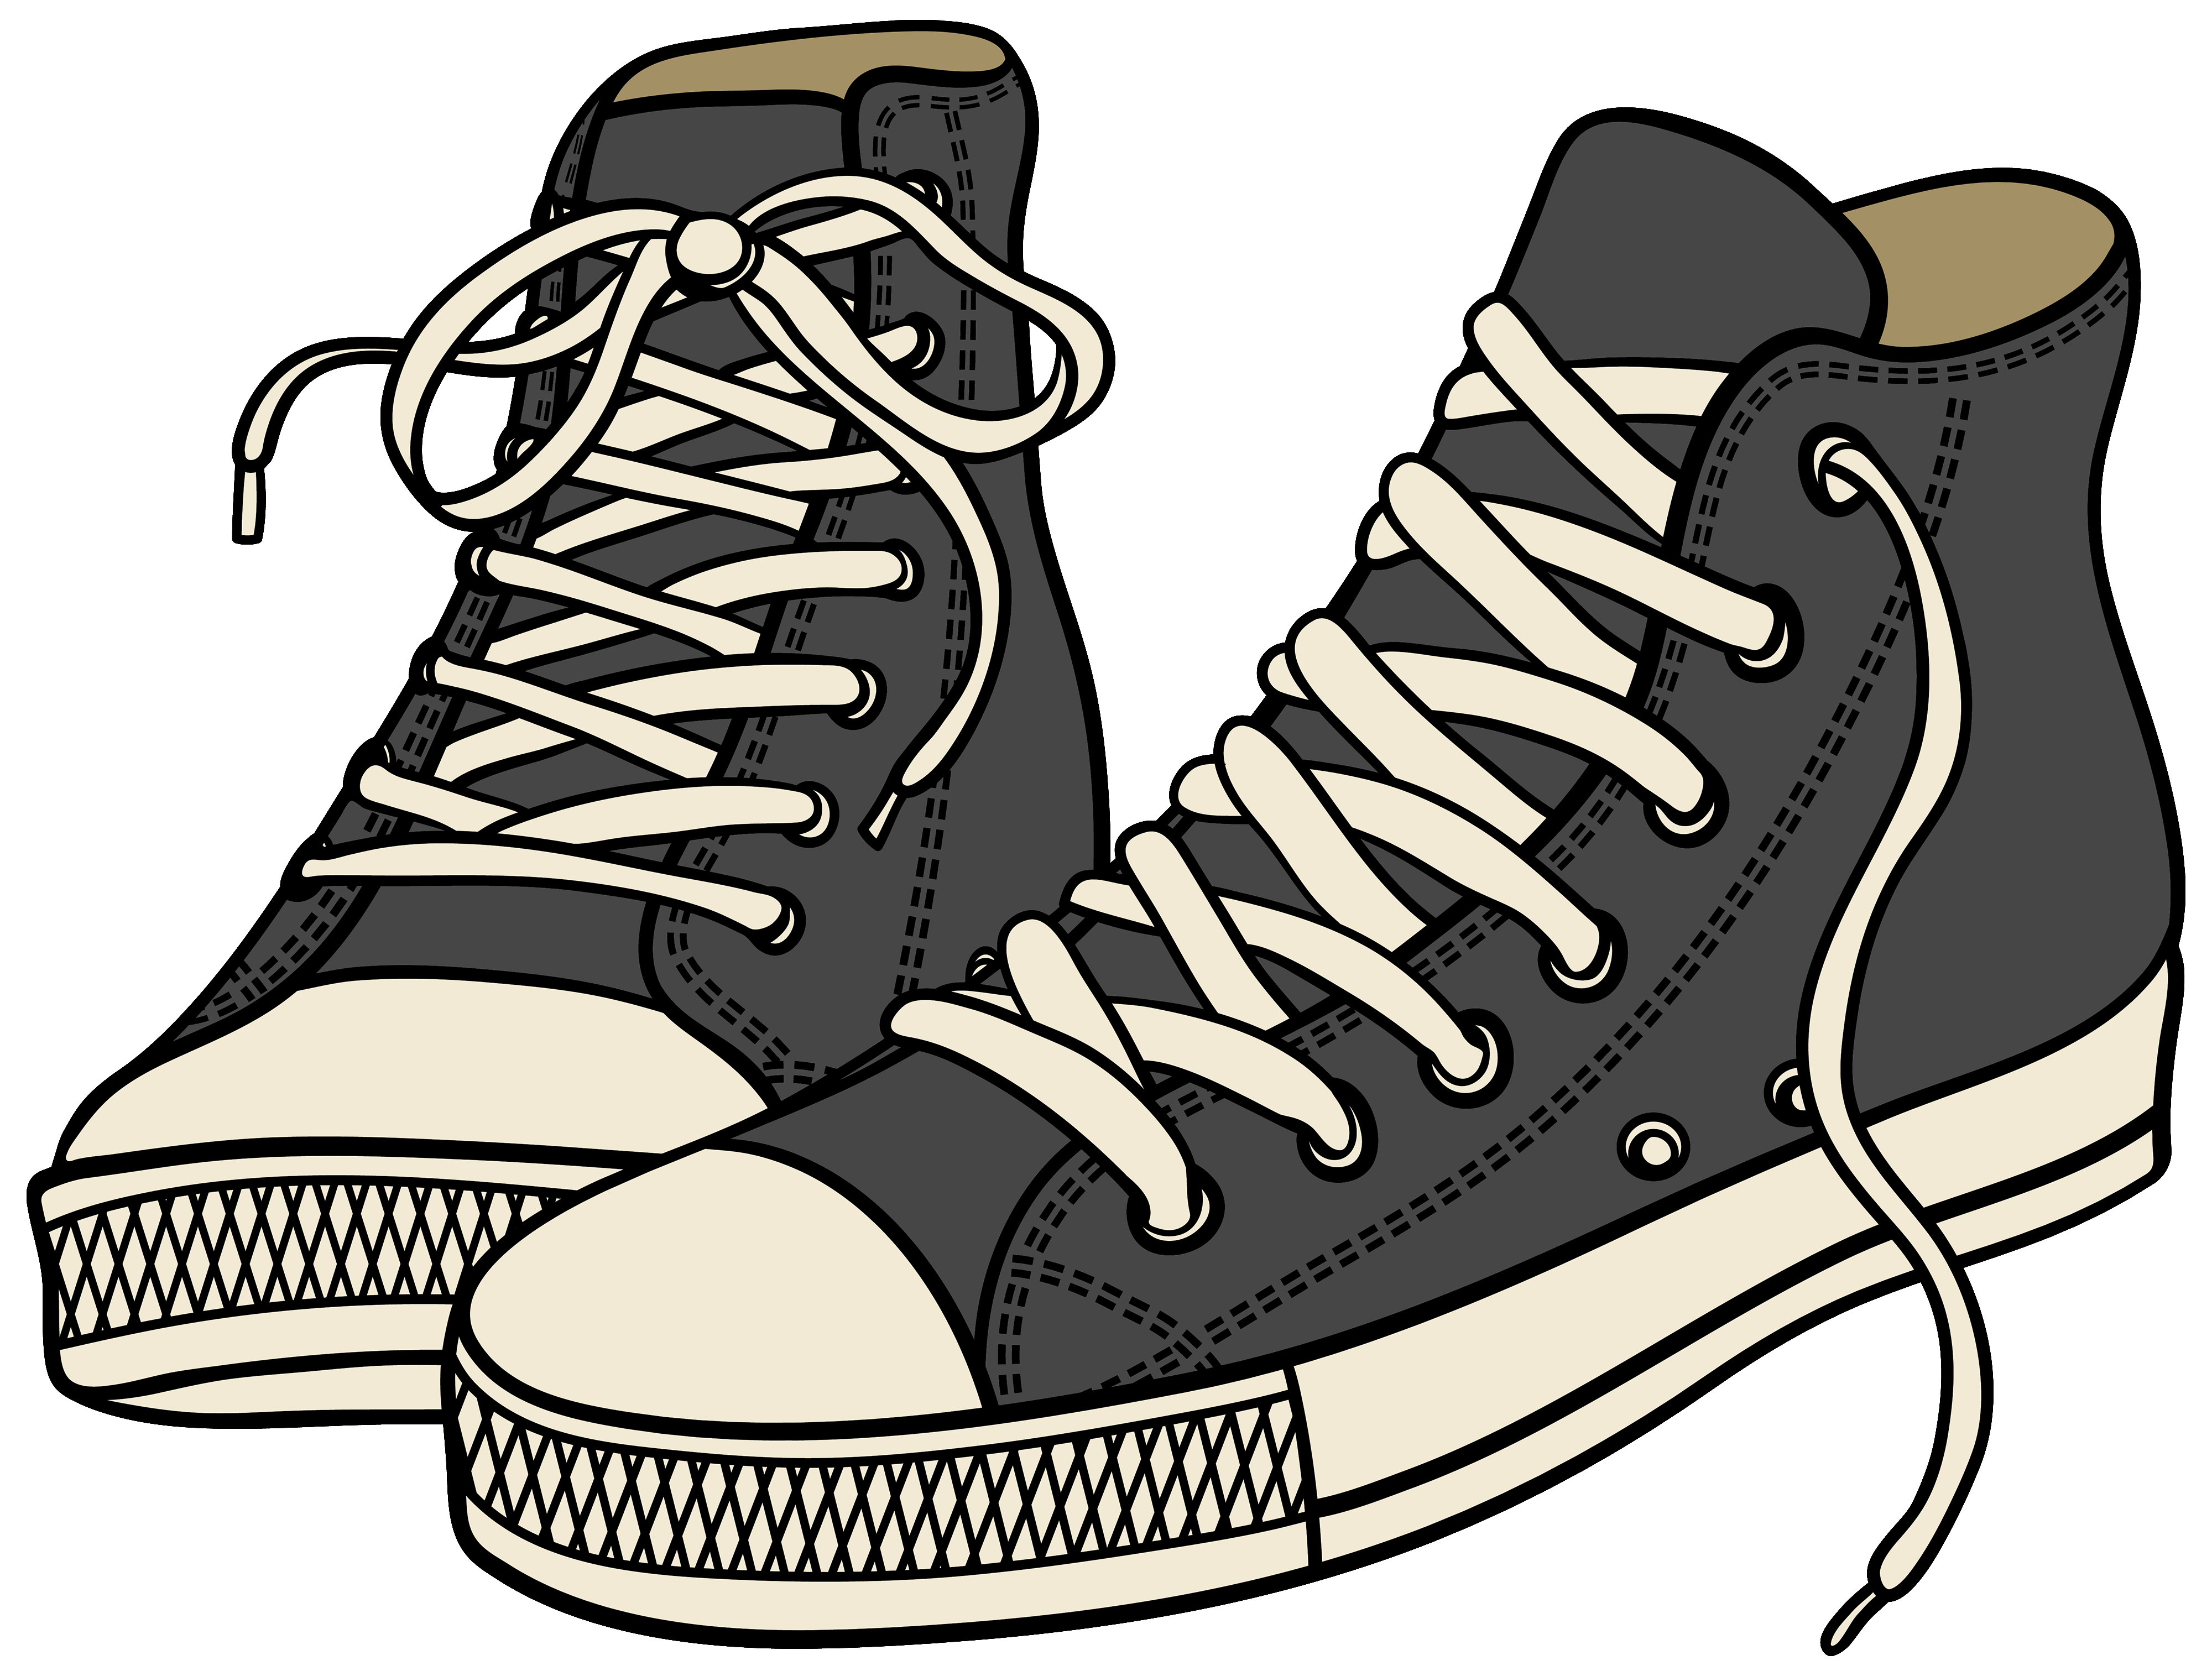 Free Cartoon Shoes Png, Download Free Cartoon Shoes Png png images